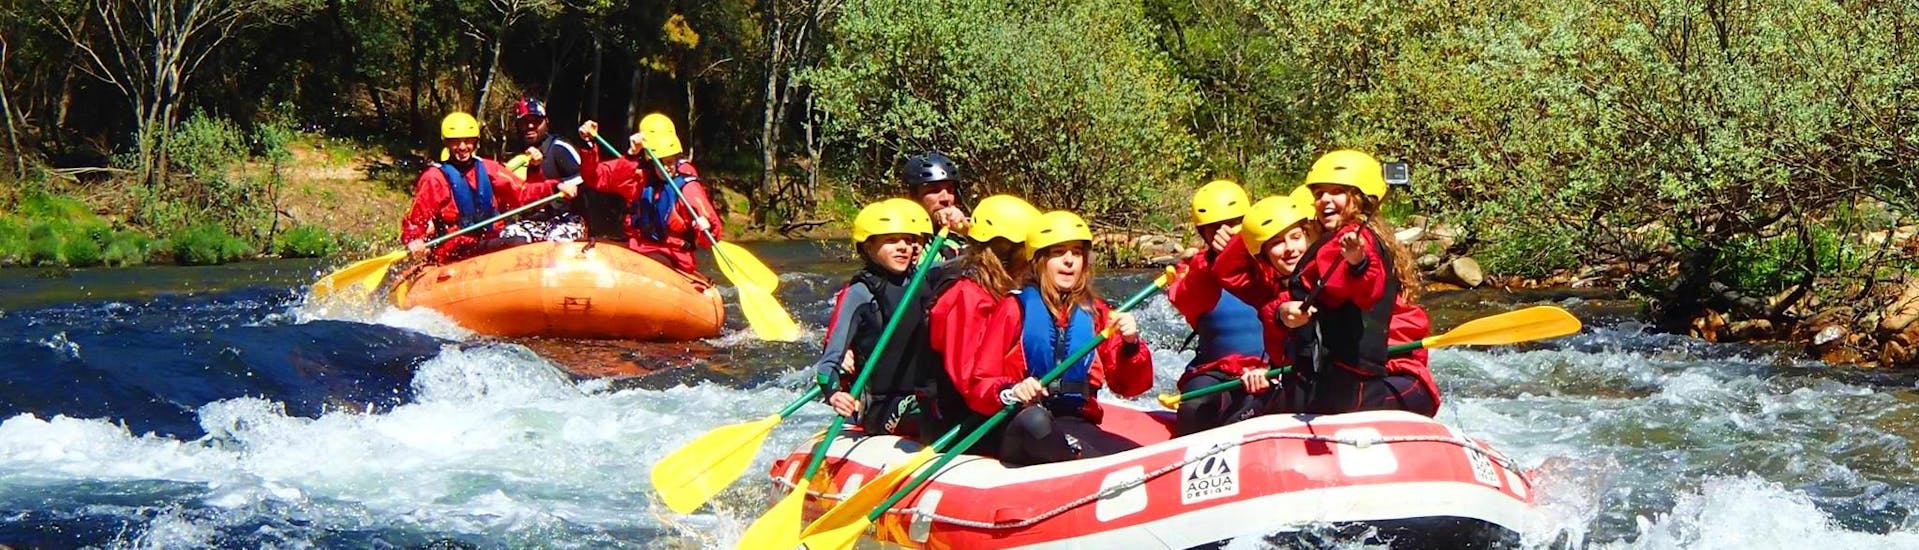 A rafting tour on Rio Paiva in Arouca Geopark, where Clube do Paiva offers different outdoor activities, including rafting and canyoning.